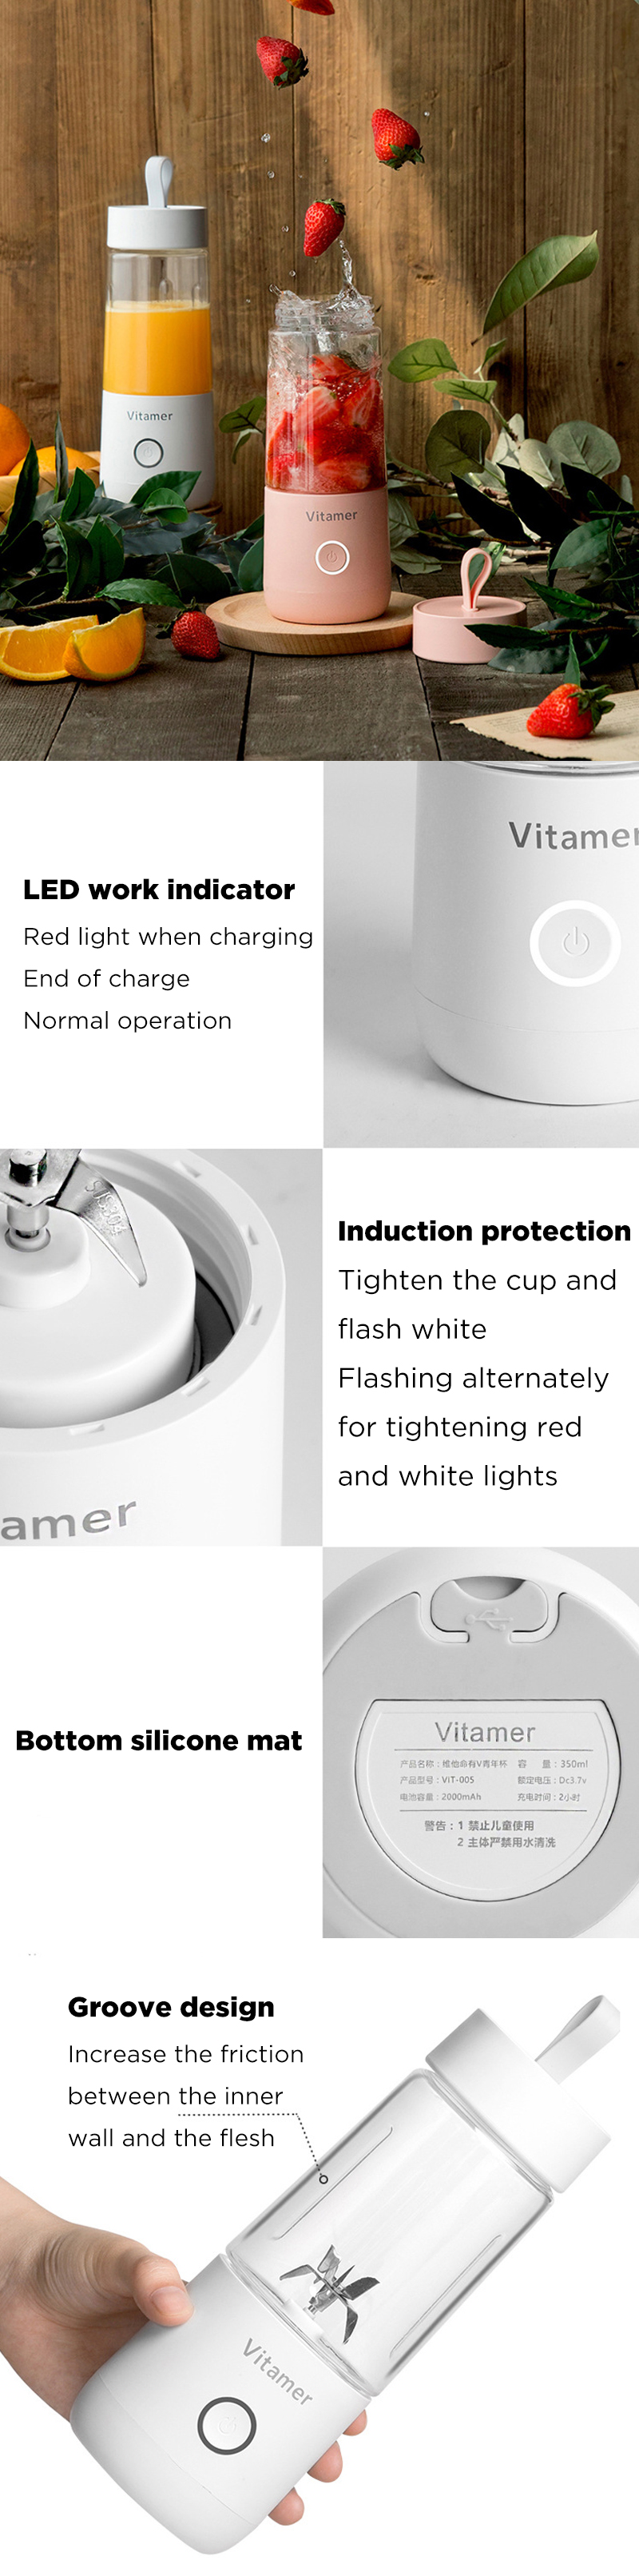 Vitamer 65W 350ml USB Automatic Fruit Juicer Bottle DIY Electric Juicing Extractor Cup Machine From Xioami Youpin 13